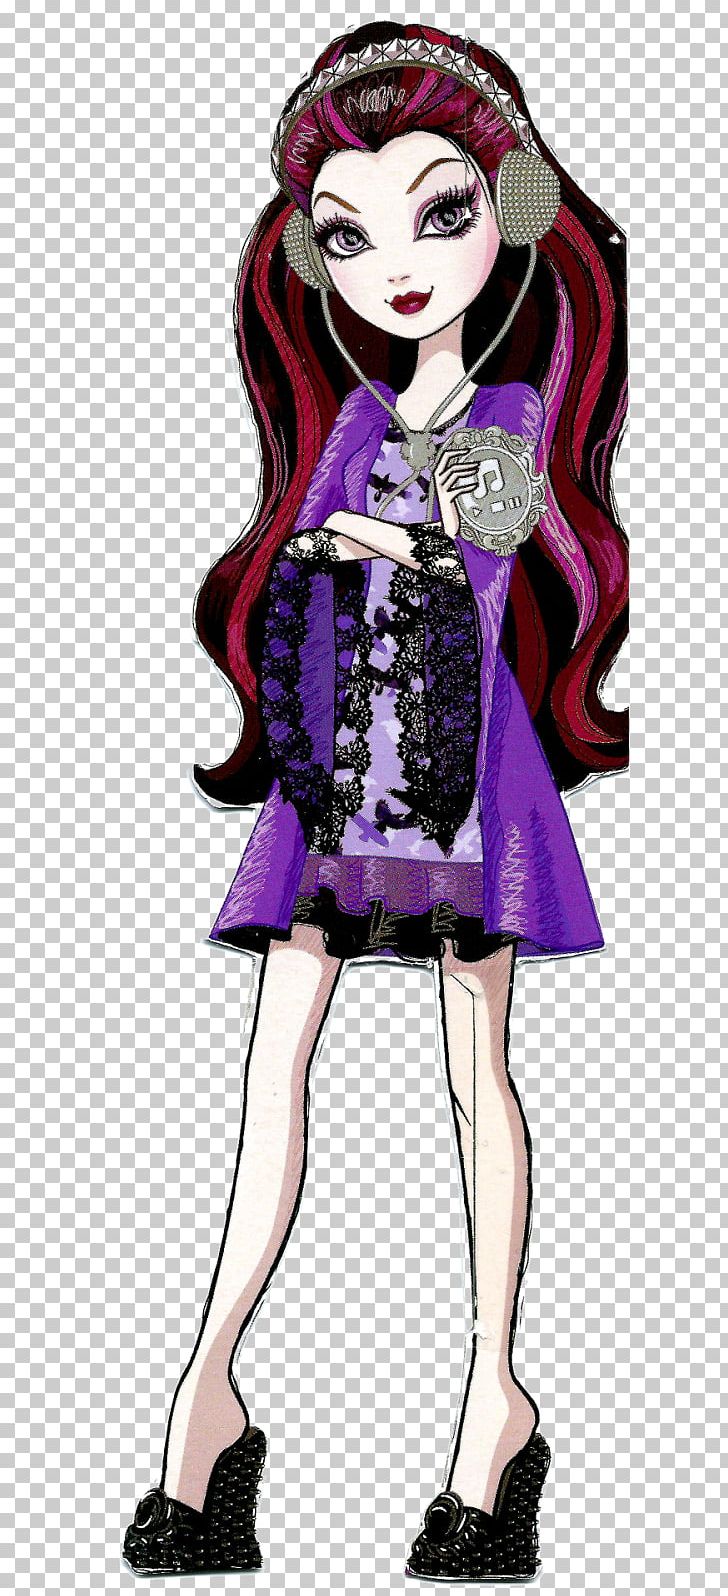 Ever After High Legacy Day Apple White Doll Ever After High Legacy Day Apple White Doll Monster High Queen PNG, Clipart, Art, Black Hair, Character, Costume Design, Doll Free PNG Download